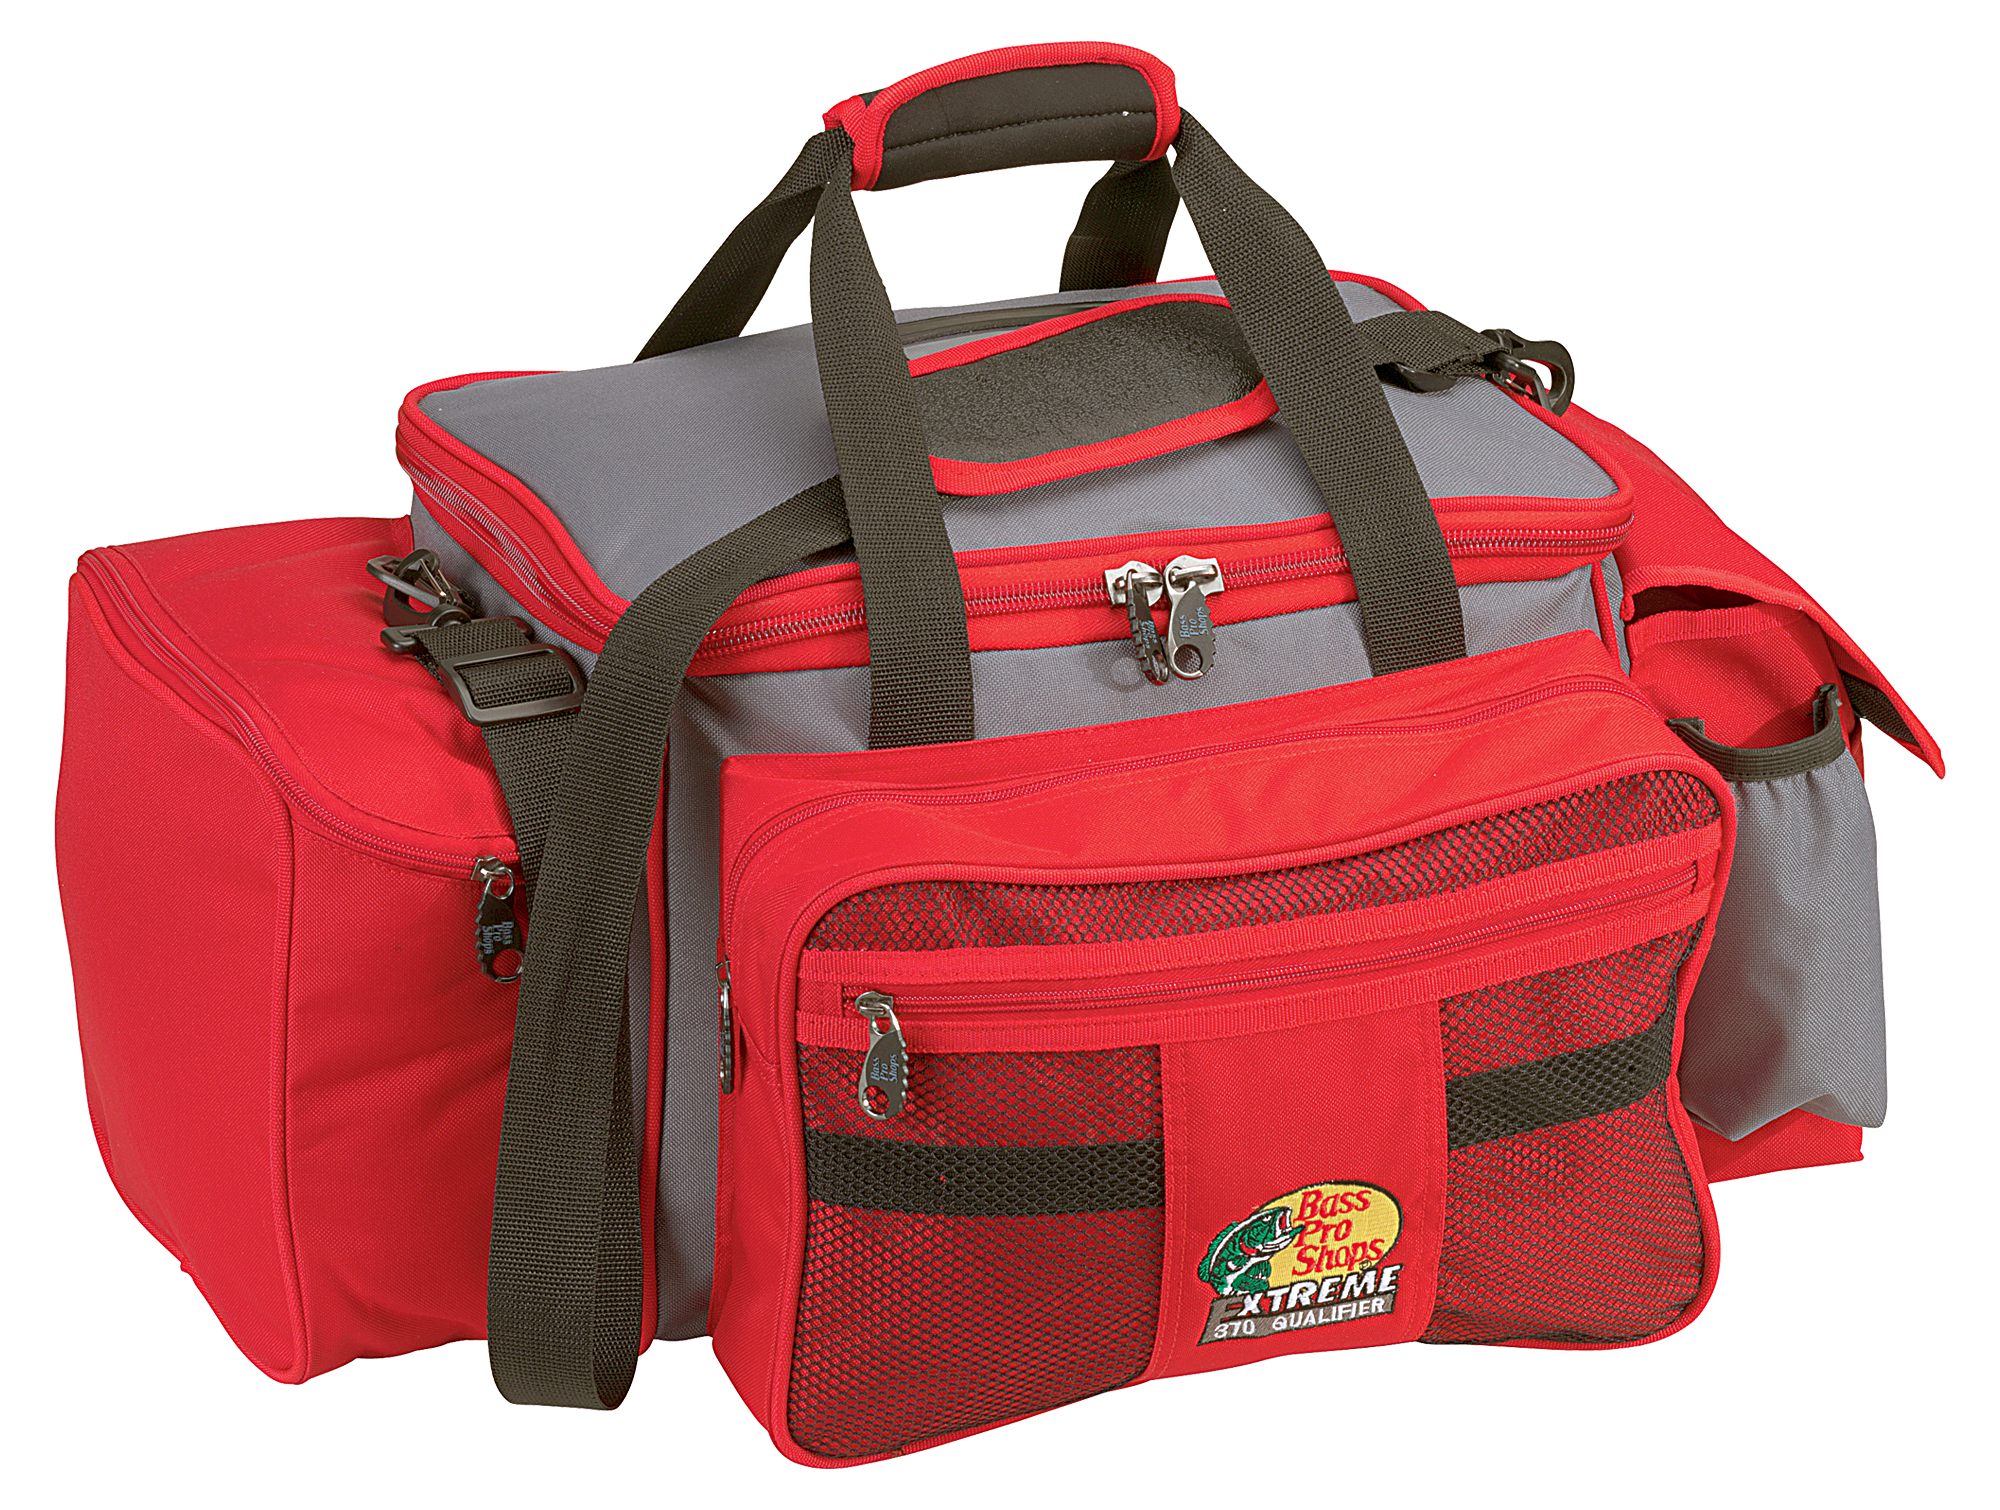 Bass Pro Shops Extreme Qualifier 370 Tackle Bag or System